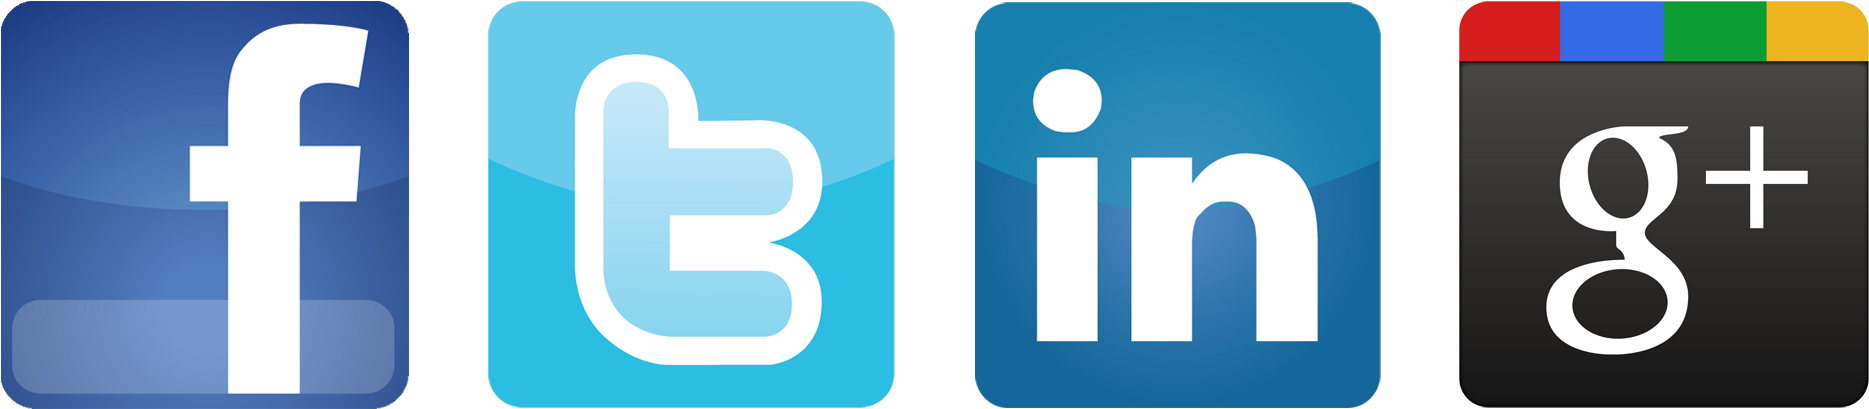 Twiter Linkedin And Icon - Facebook Twitter Linkedin Icons Vector (2000x500)